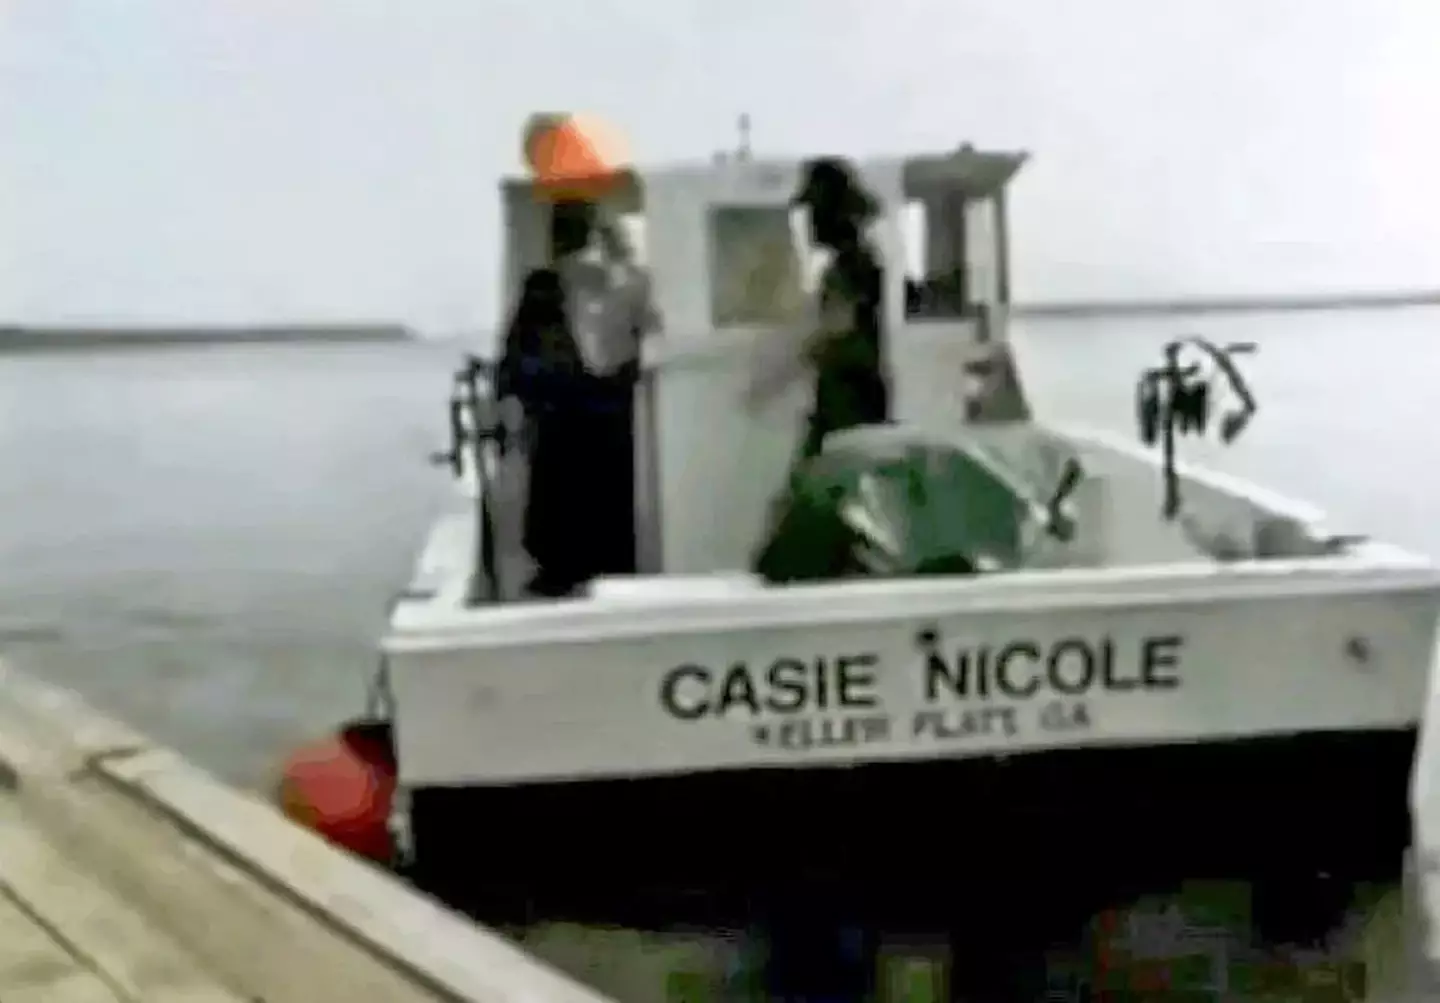 Four men went out to sea in the Casie Nicole, only one returned. (Unsolved Mysteries)